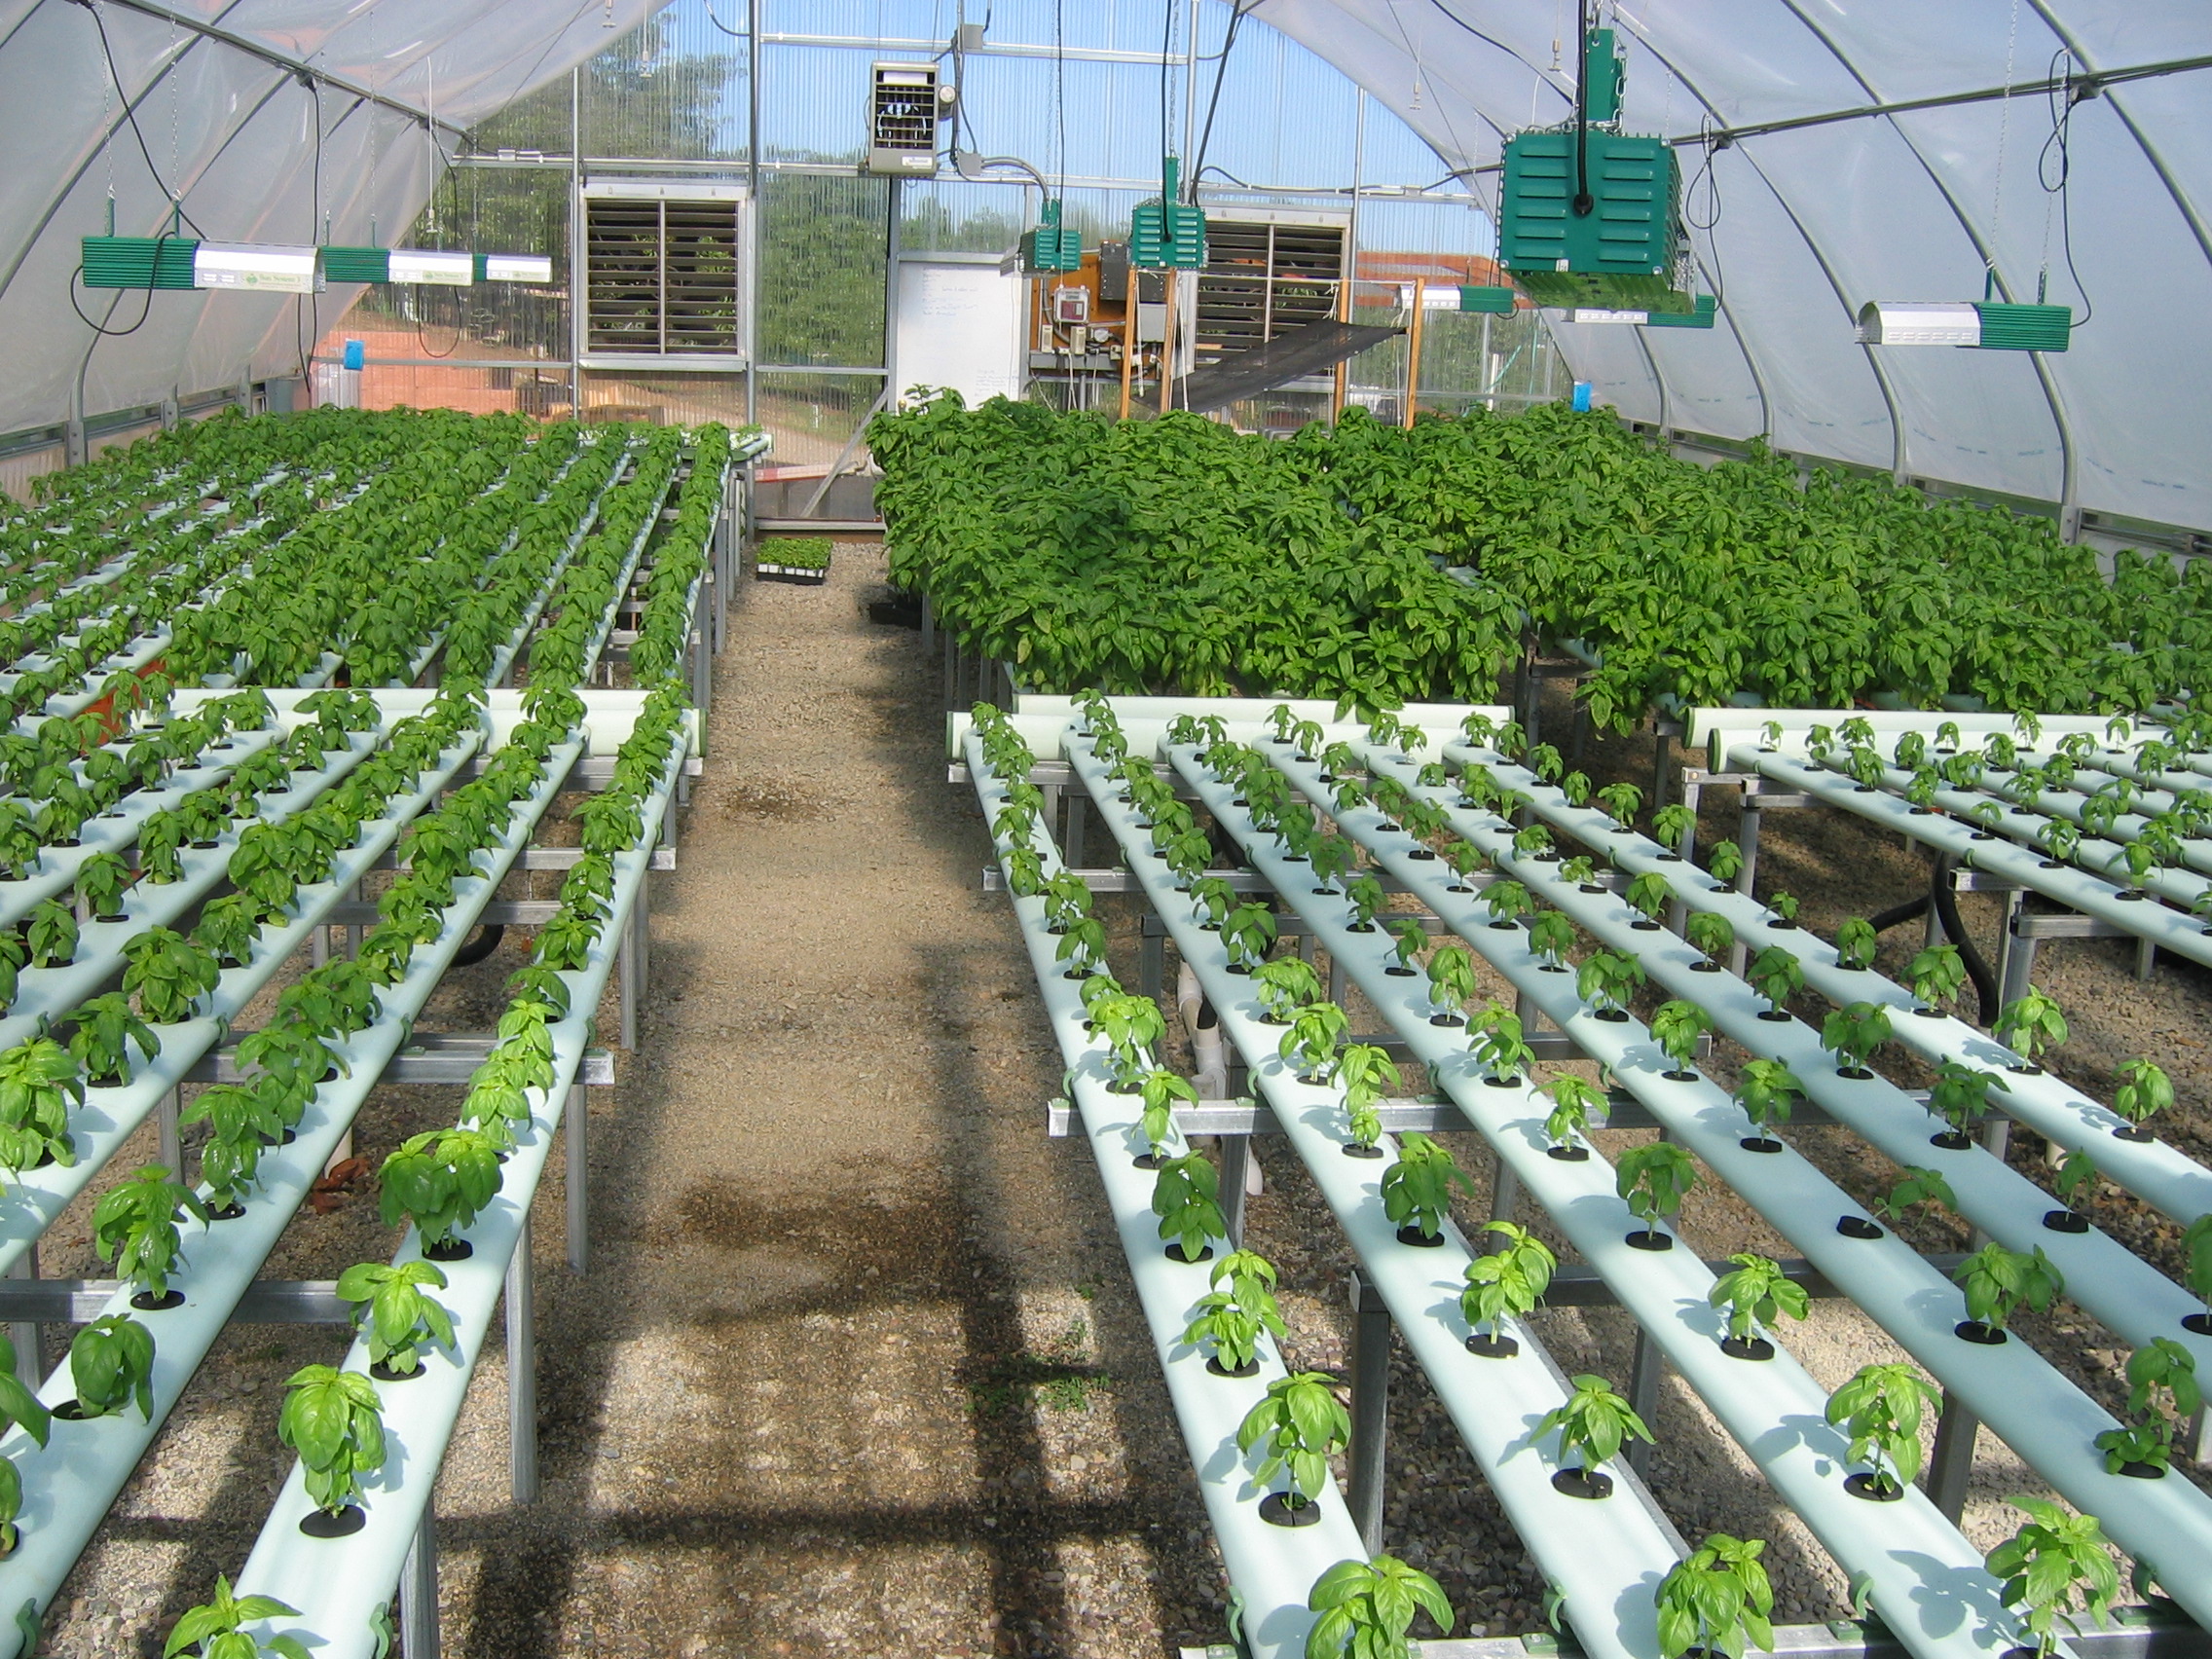 The Battle of the Greenhouses: